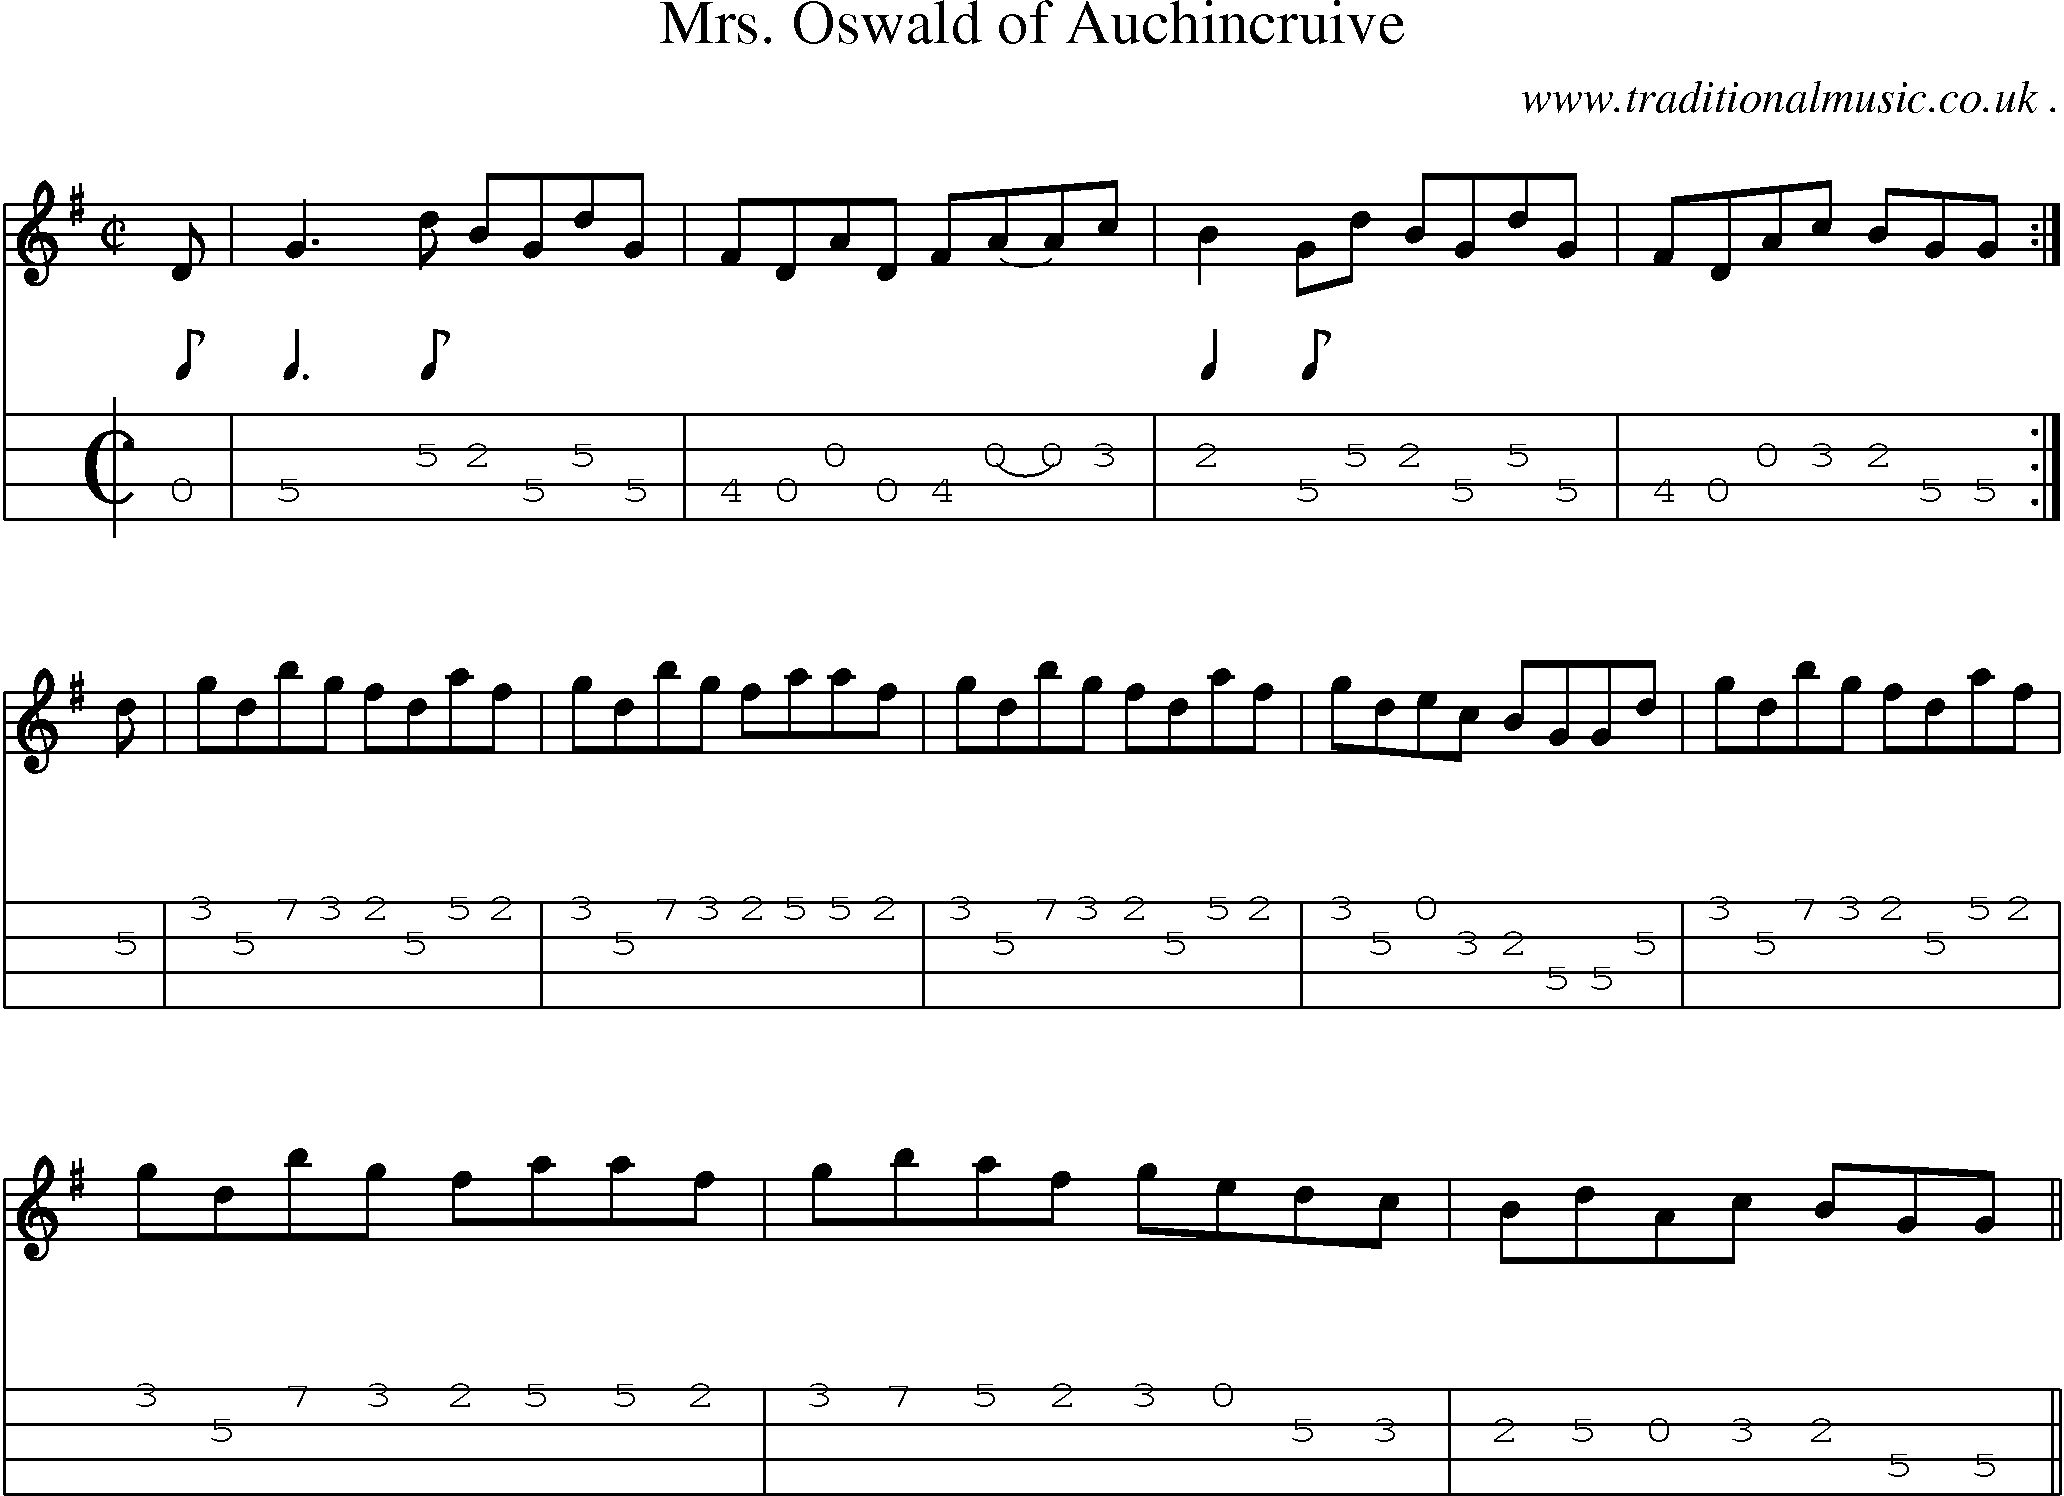 Sheet-music  score, Chords and Mandolin Tabs for Mrs Oswald Of Auchincruive